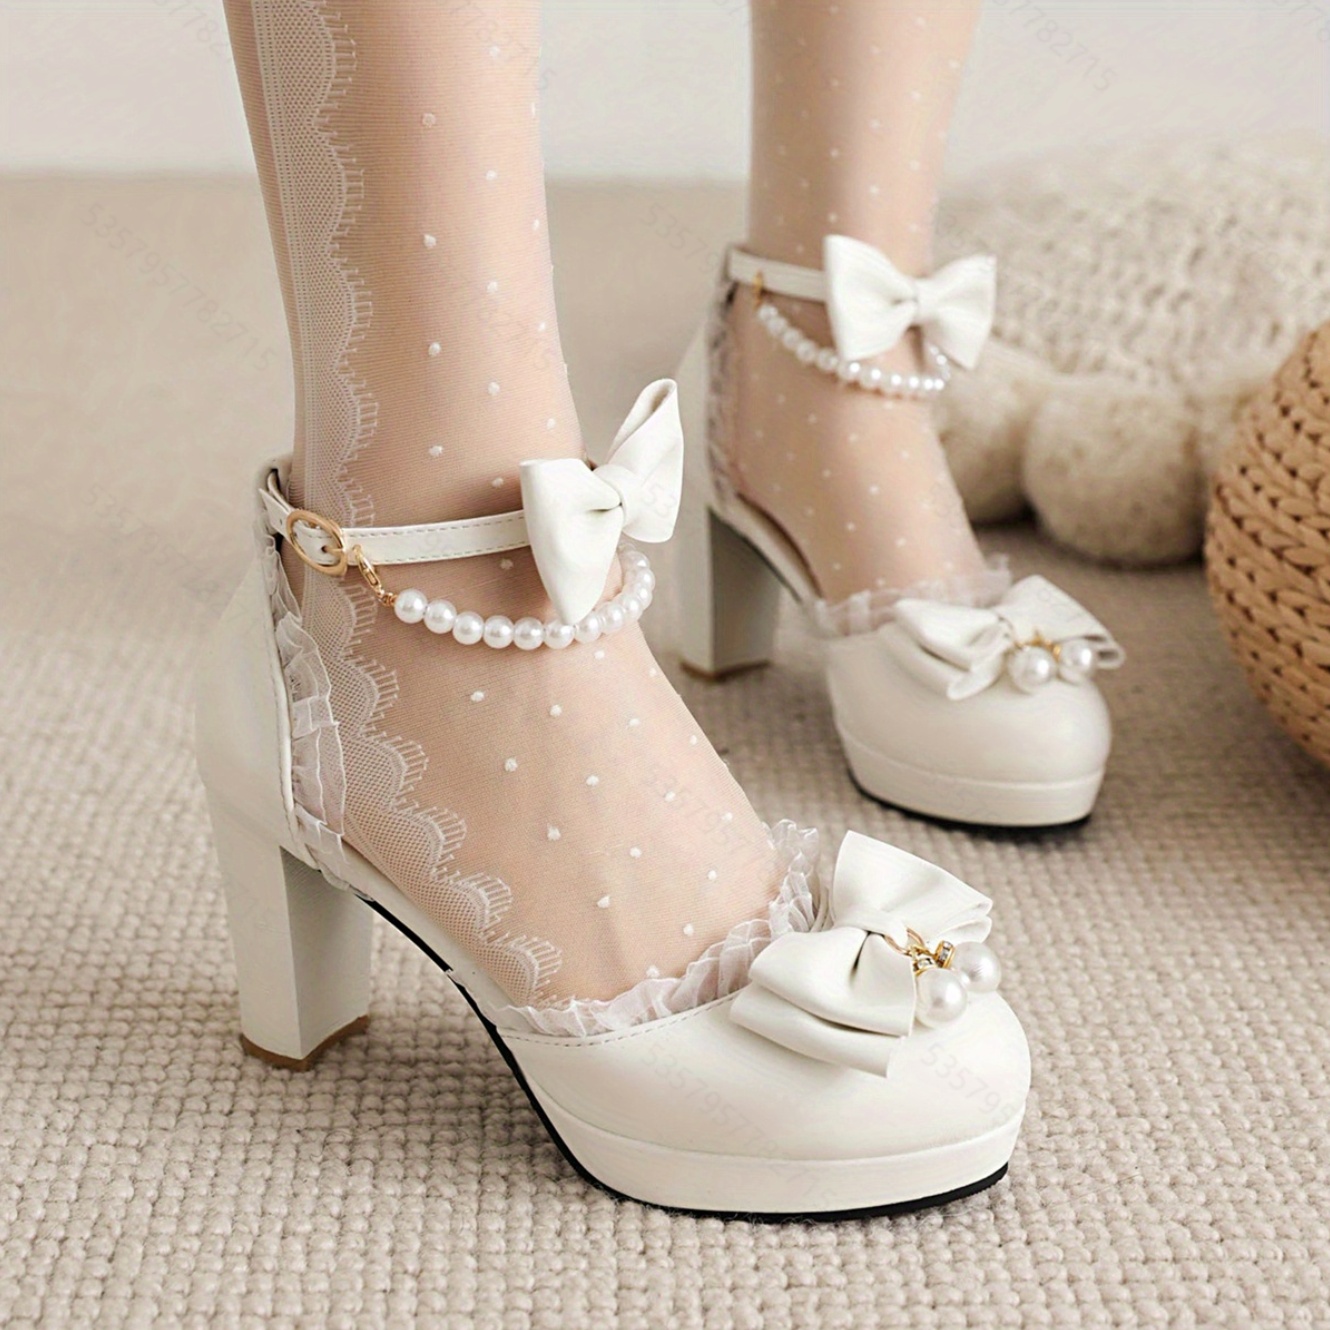 Shoes Pearls Women, High Heels Pearls, Wedding Sandals, Mary Jane Shoes